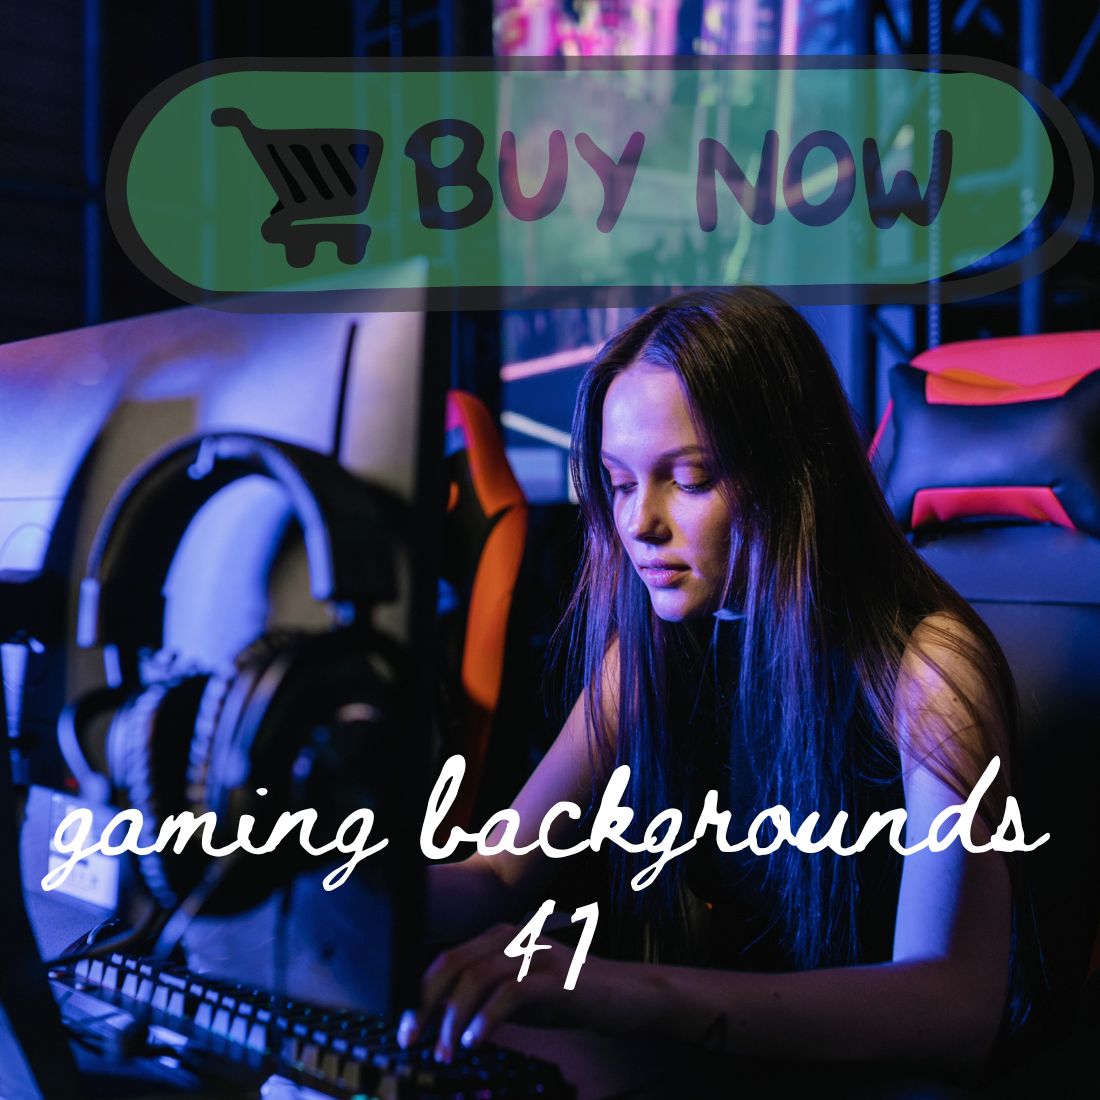 41 gaming backgrounds cover image.